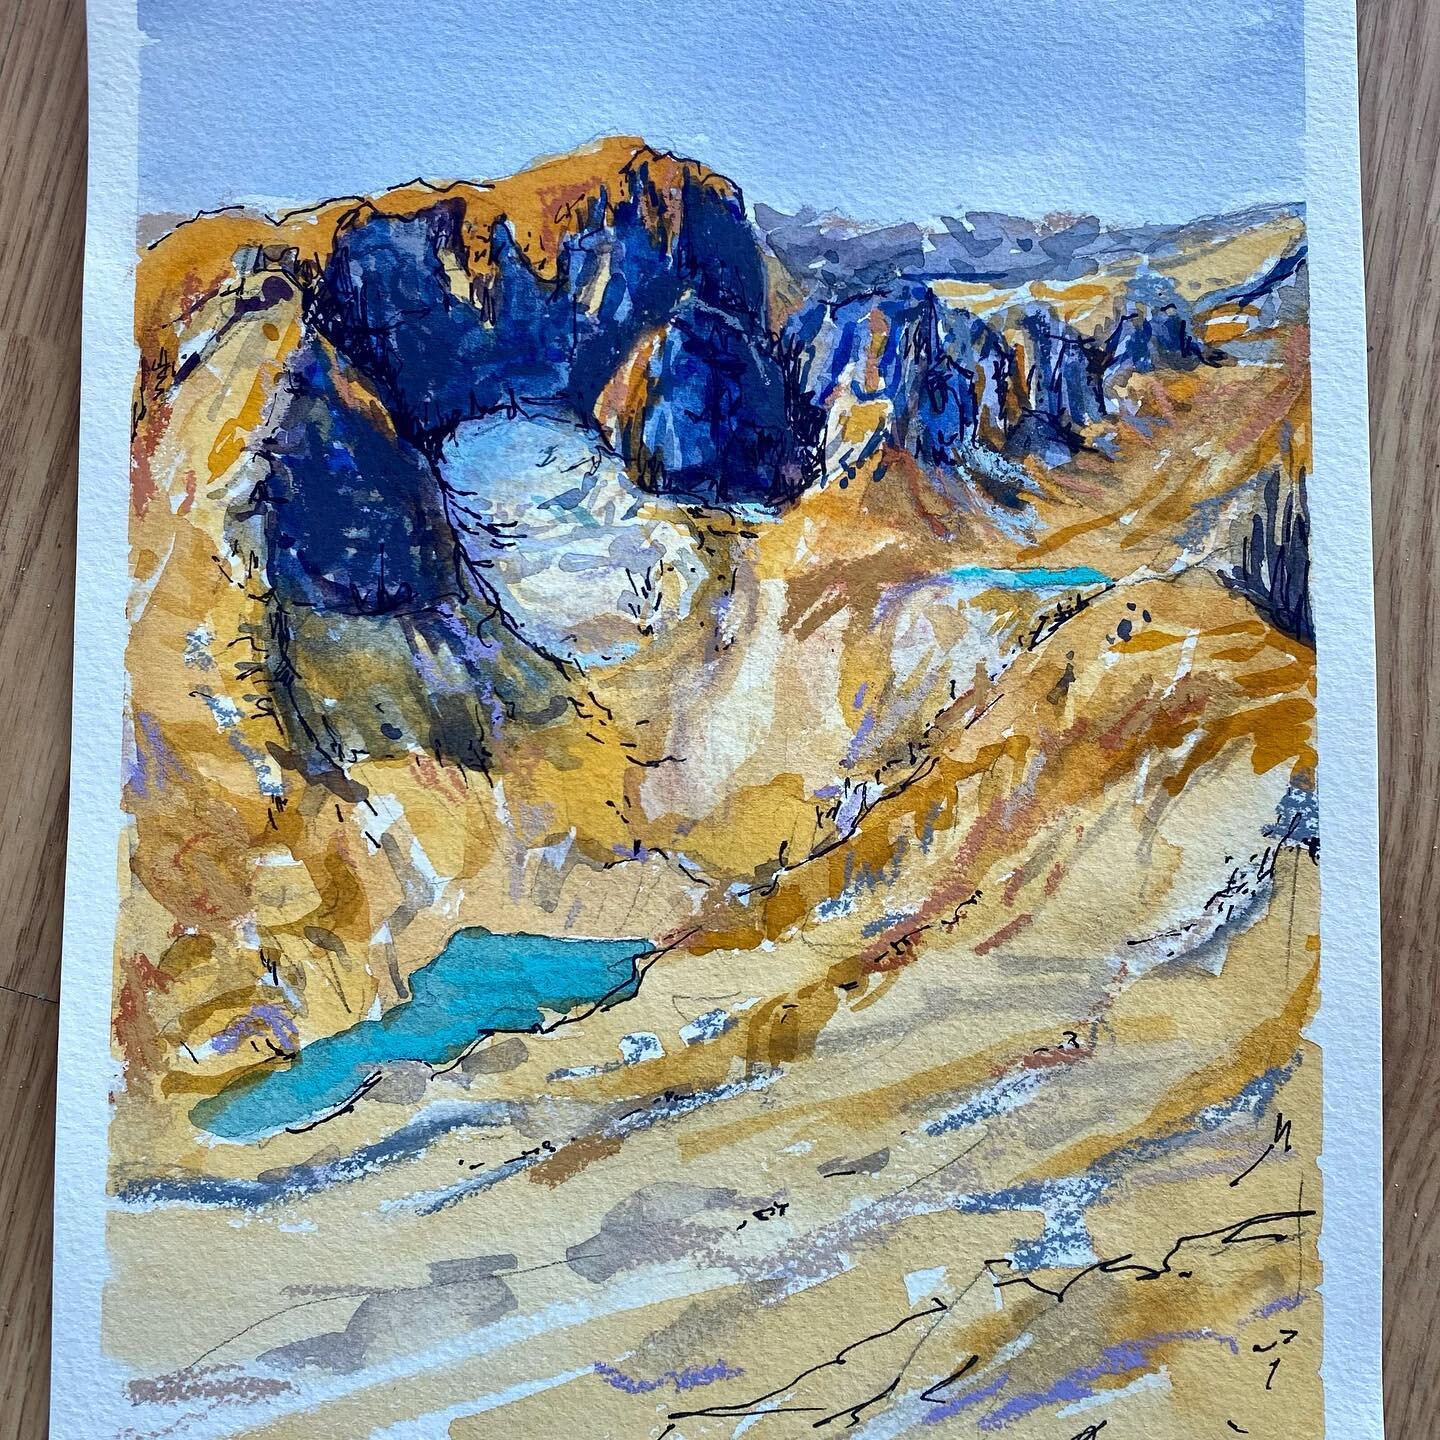 I&rsquo;m kind of surprising myself with the amount of realism I got into here. 😜 #montanaglaciers #skypilotmountain #3Dmapsourced #thanksgoogle #watercolorlandscape #looselandscape #orangeandblue #glacierart #ecoart #conservationart #lastbestplace 